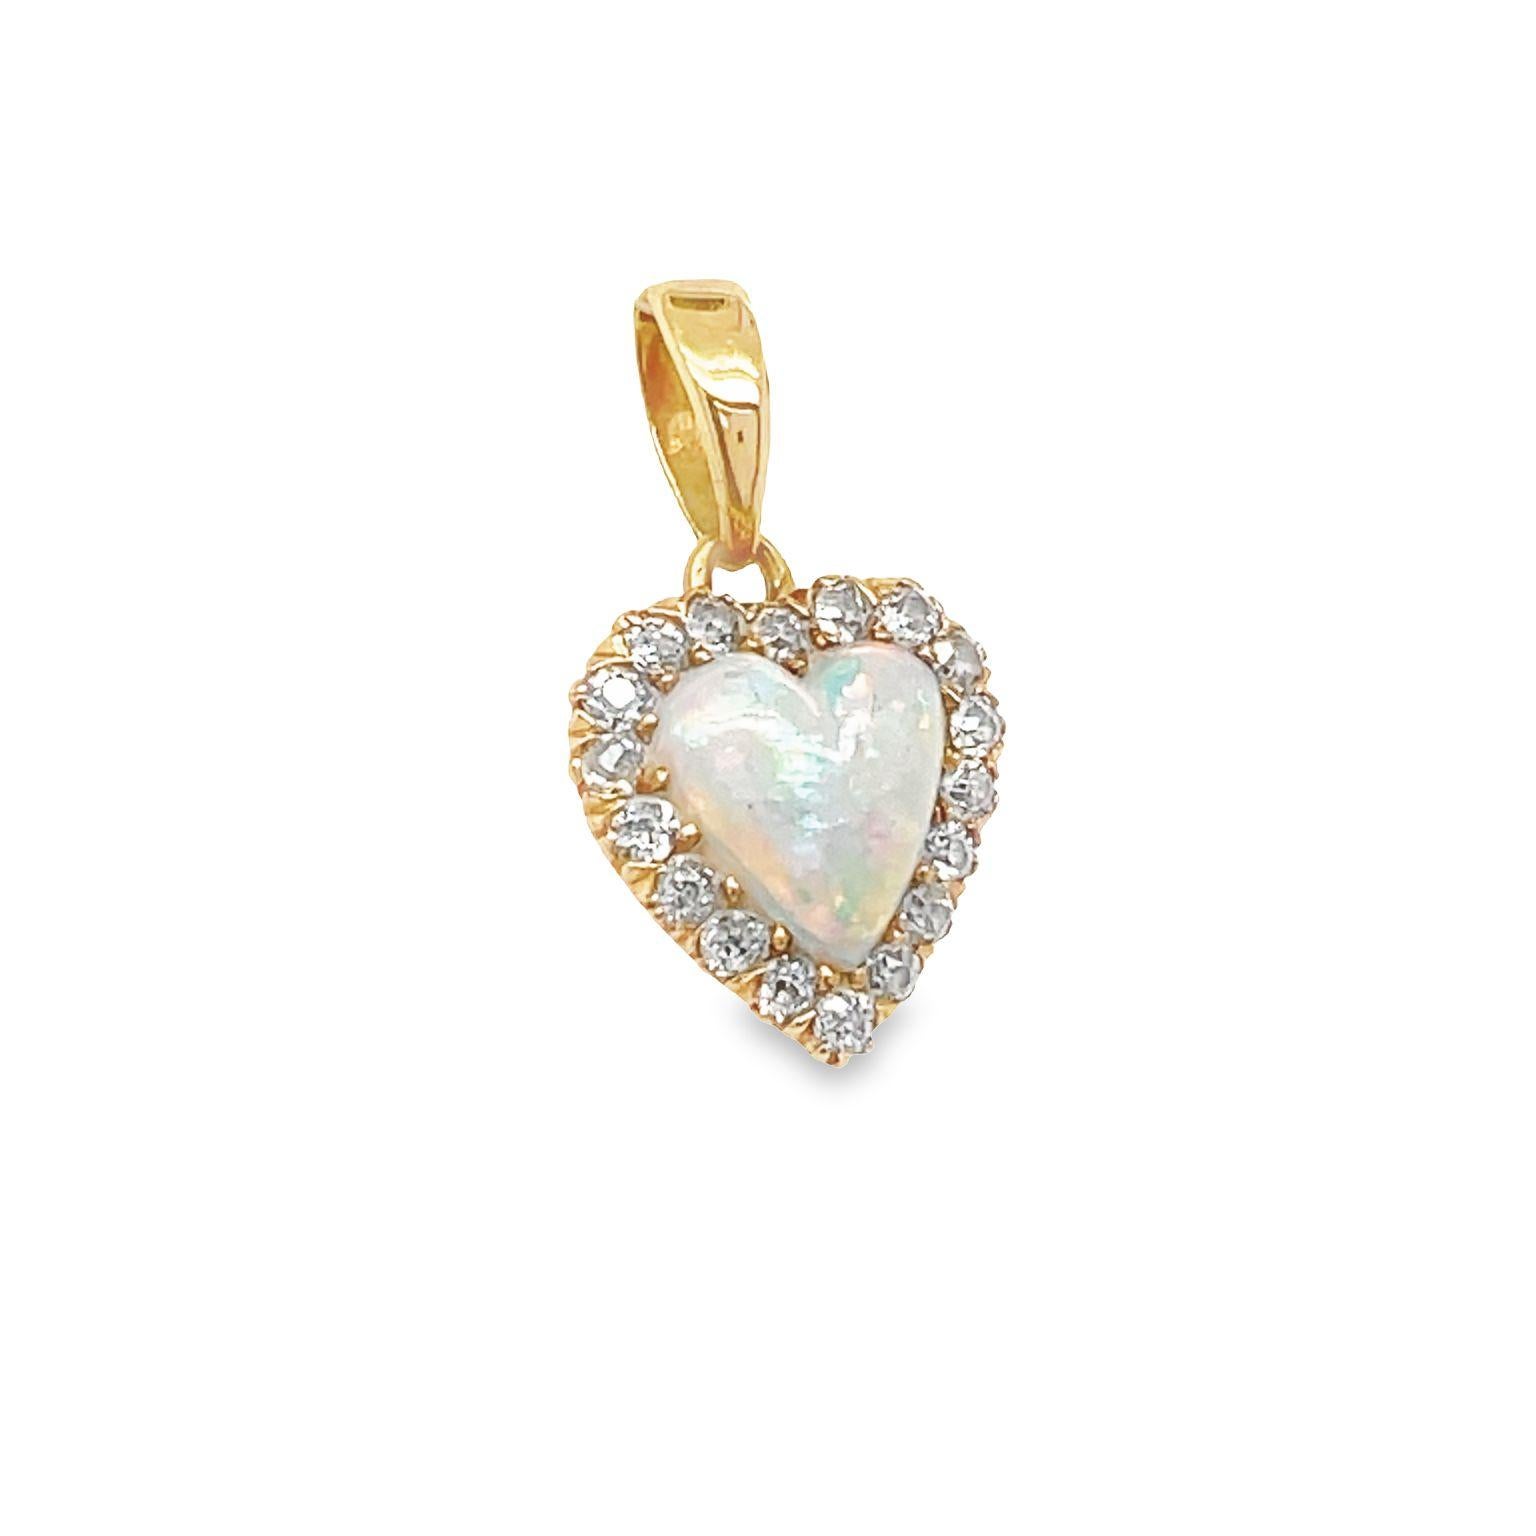 This beautiful and elegant antique 14k yellow gold pendant showcase a beautiful heart shaped opal framed in a halo of diamonds. The natural opal heart weighs approximately 0.80 carat and is encircled by old mine cut diamonds weighing around 0.30